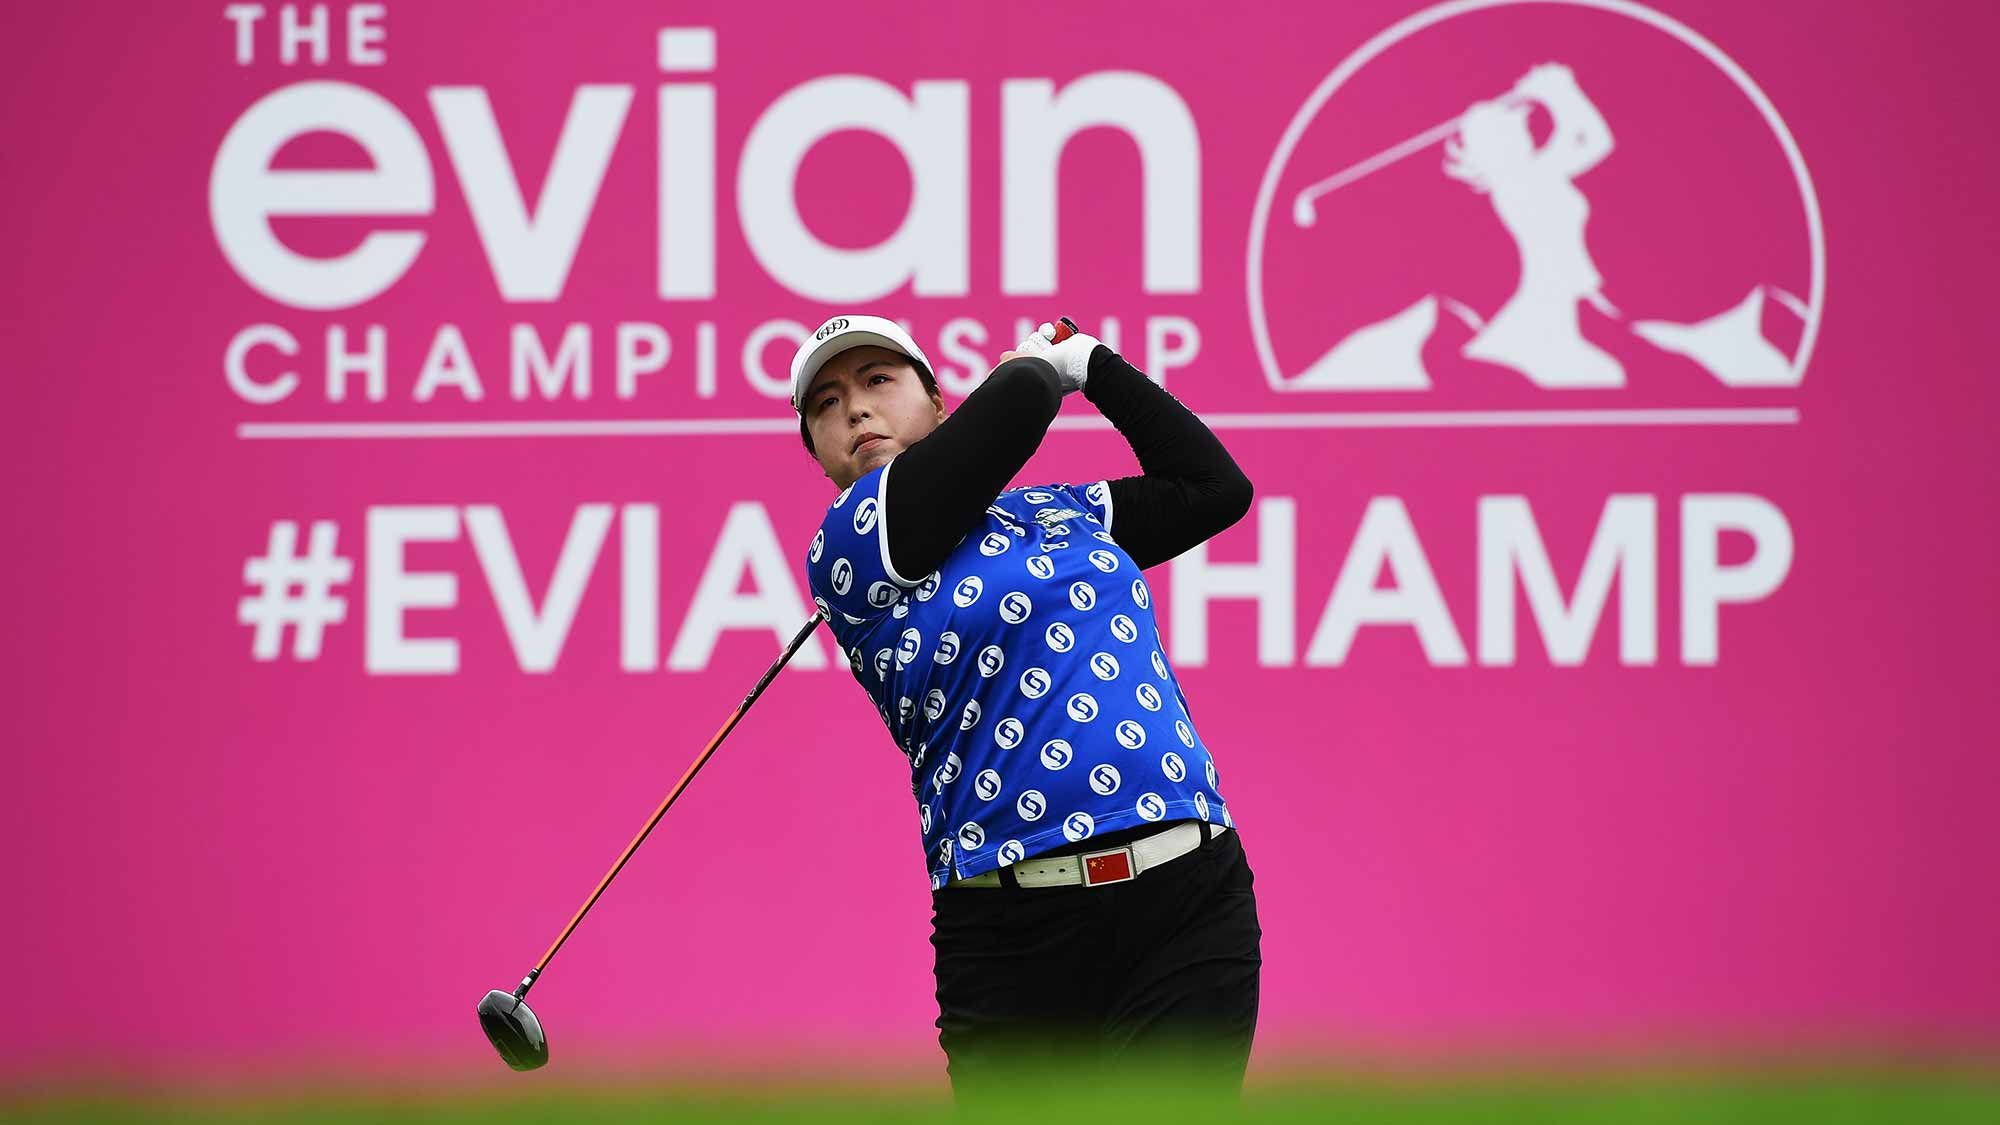 Shanshan Feng of China plays a shot during the second round of The Evian Championship